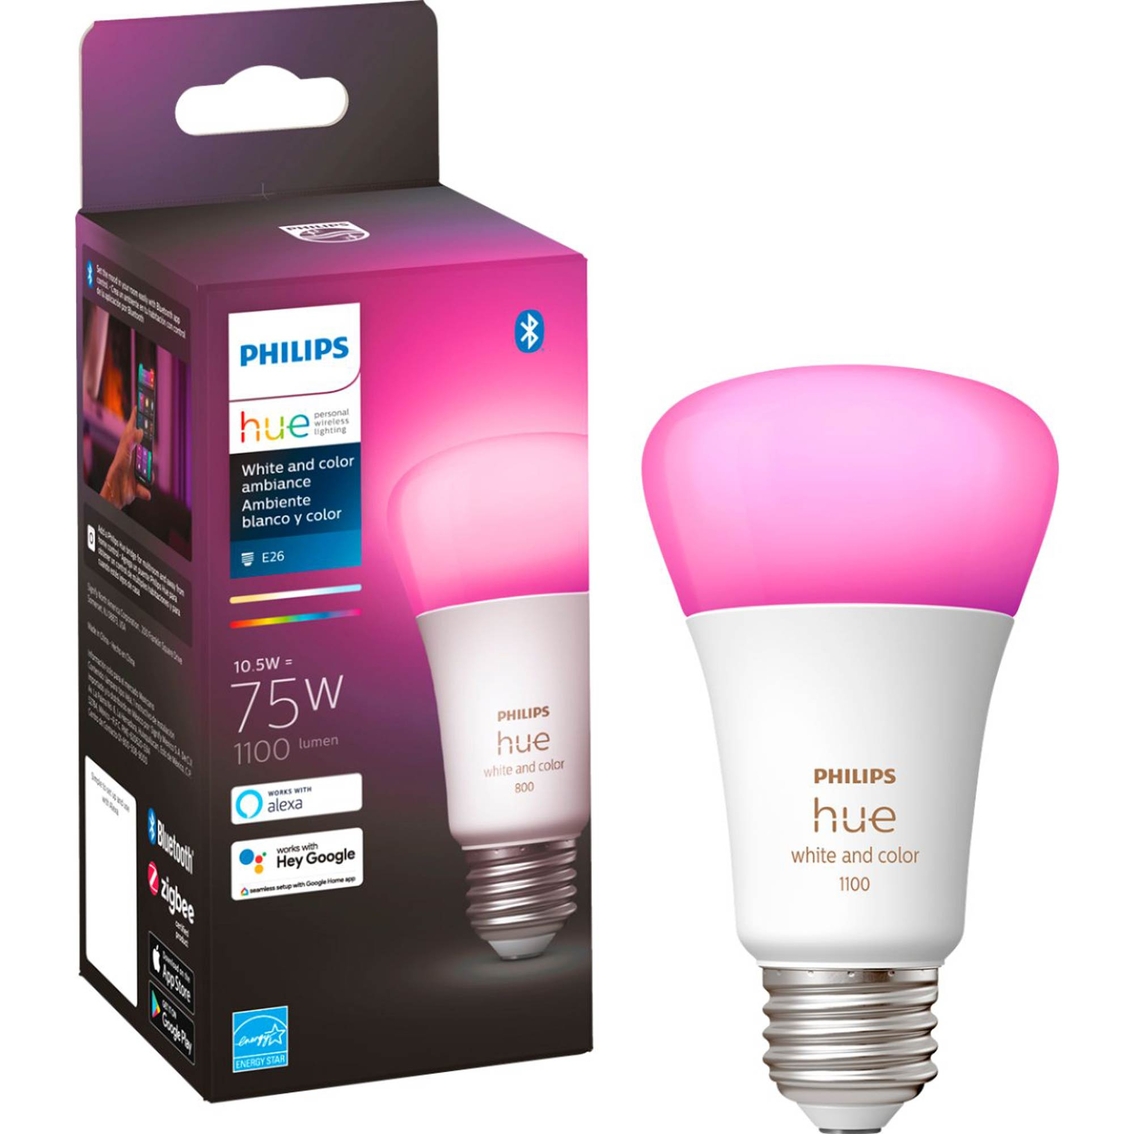 Philips Hue White and Color Ambiance A19 Bluetooth 75W Smart LED Bulb - Image 1 of 8